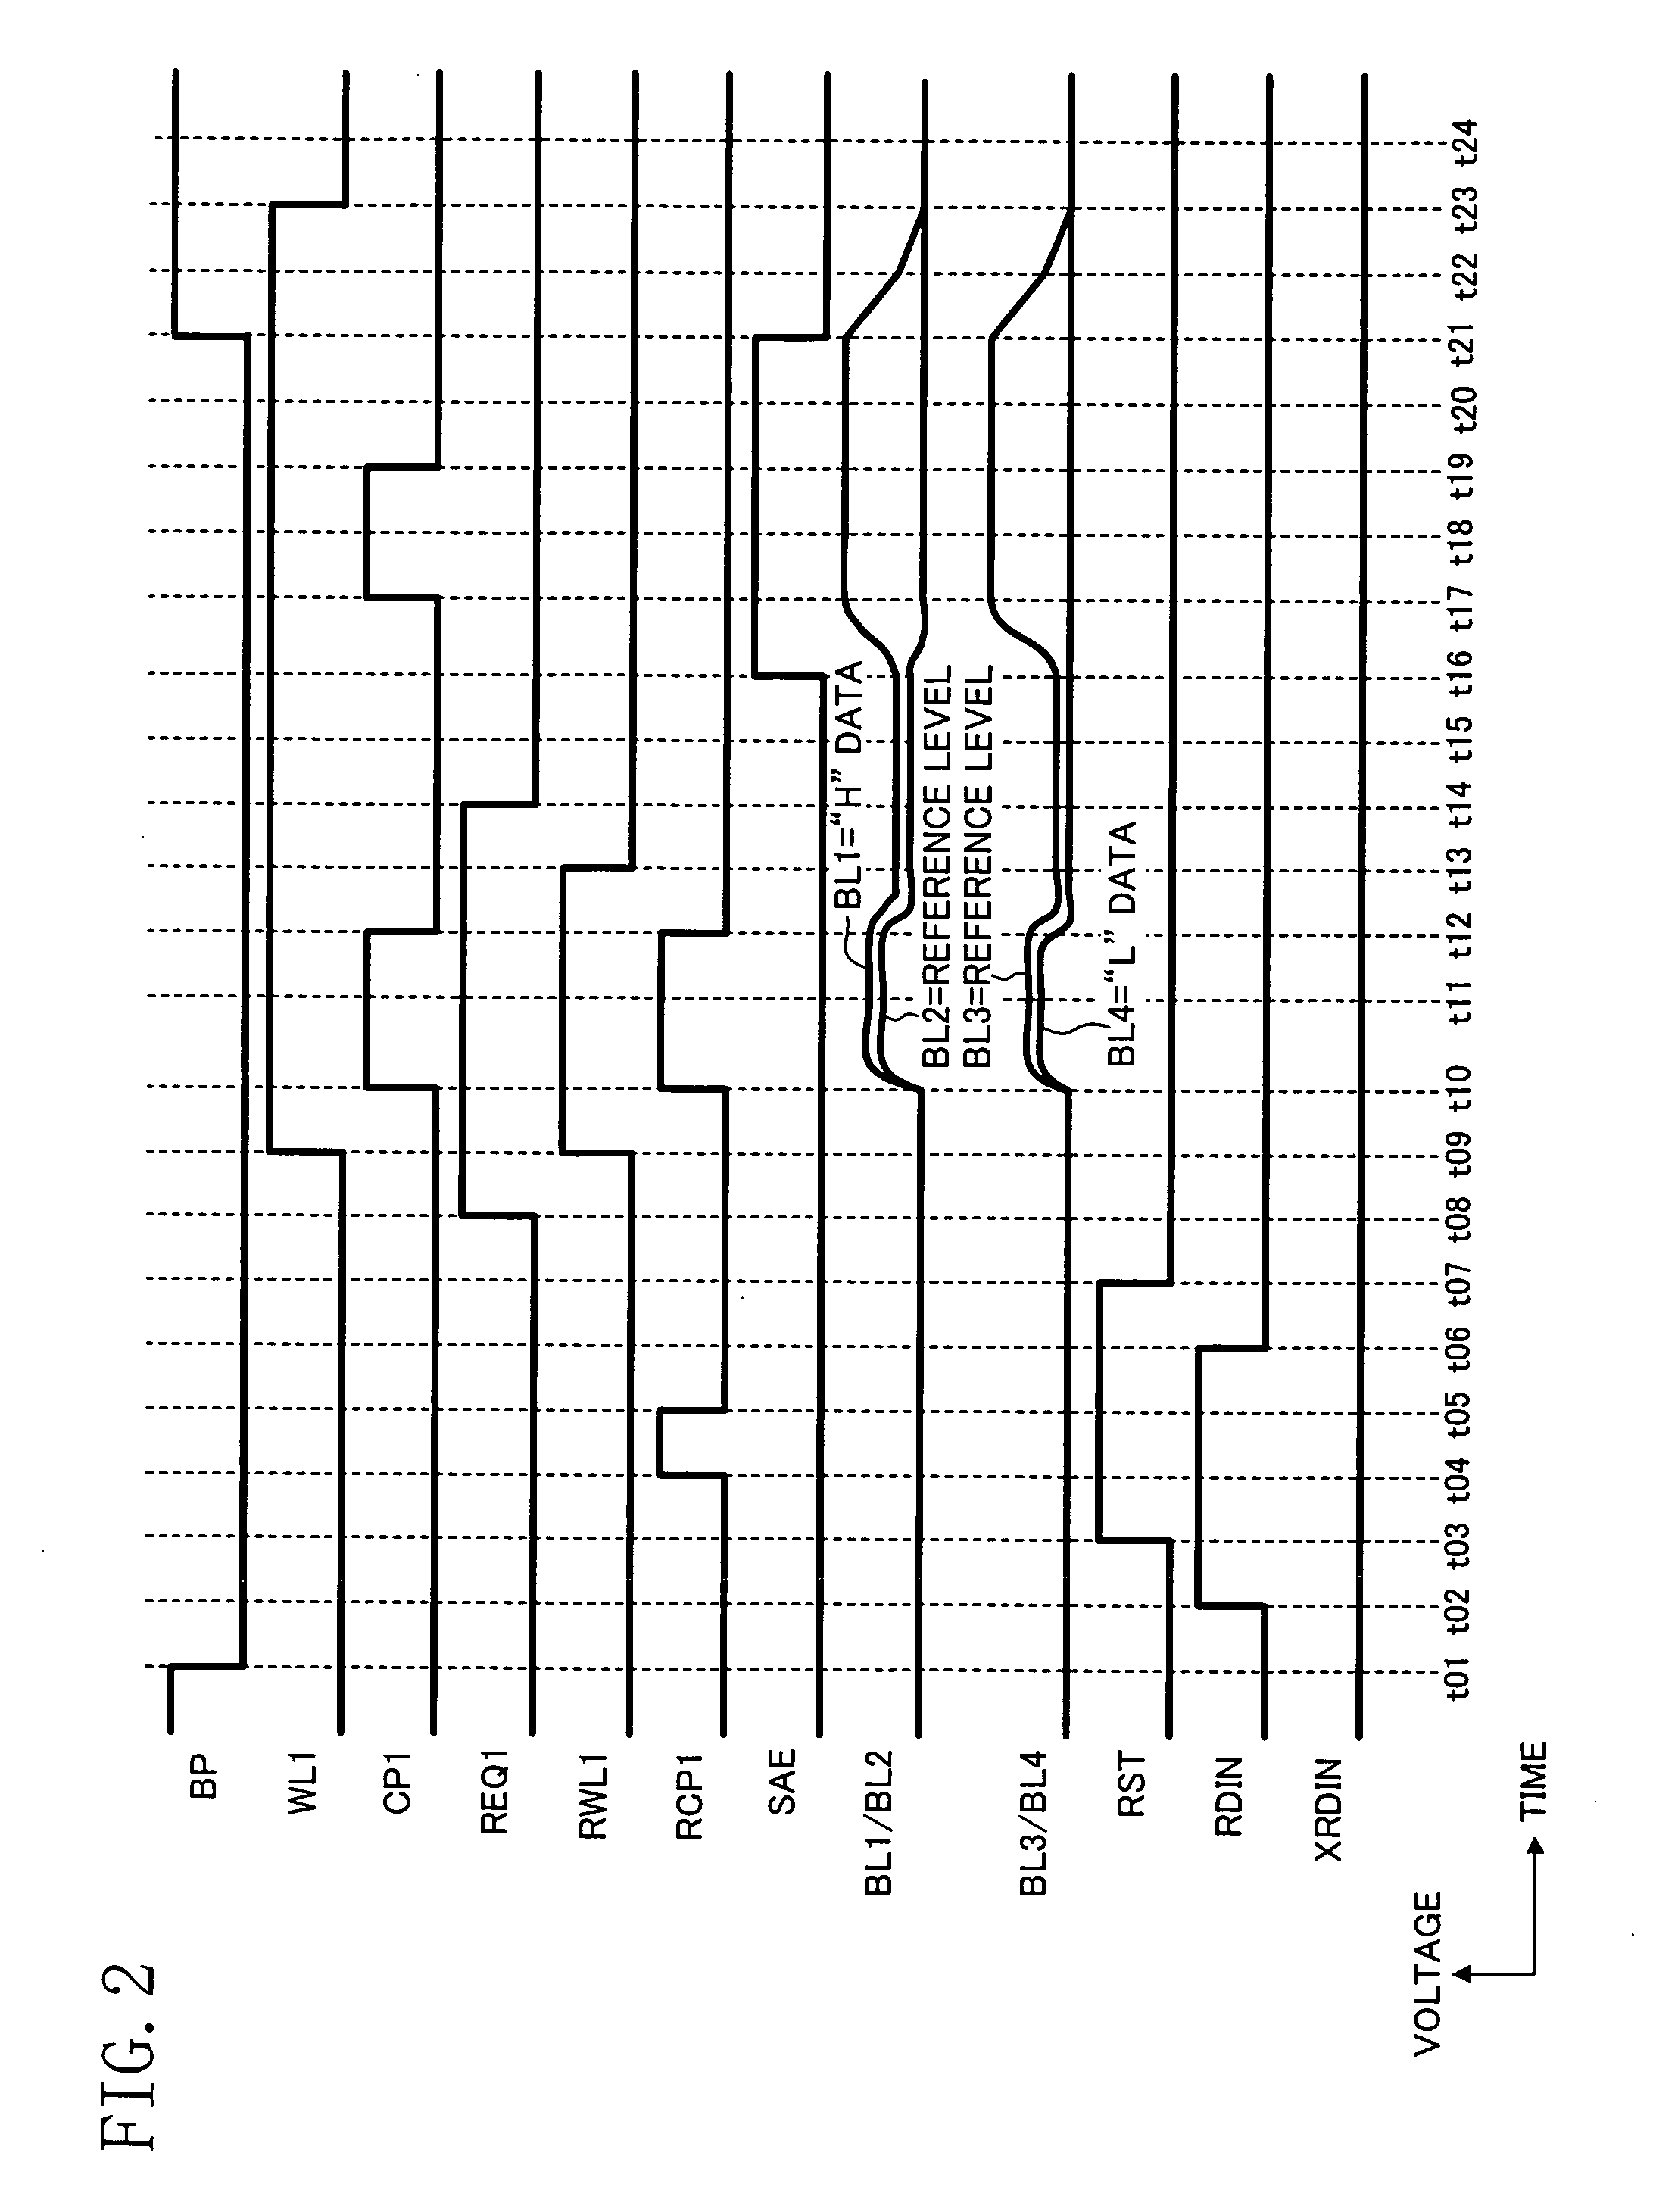 Ferroelectric semiconductor memory device